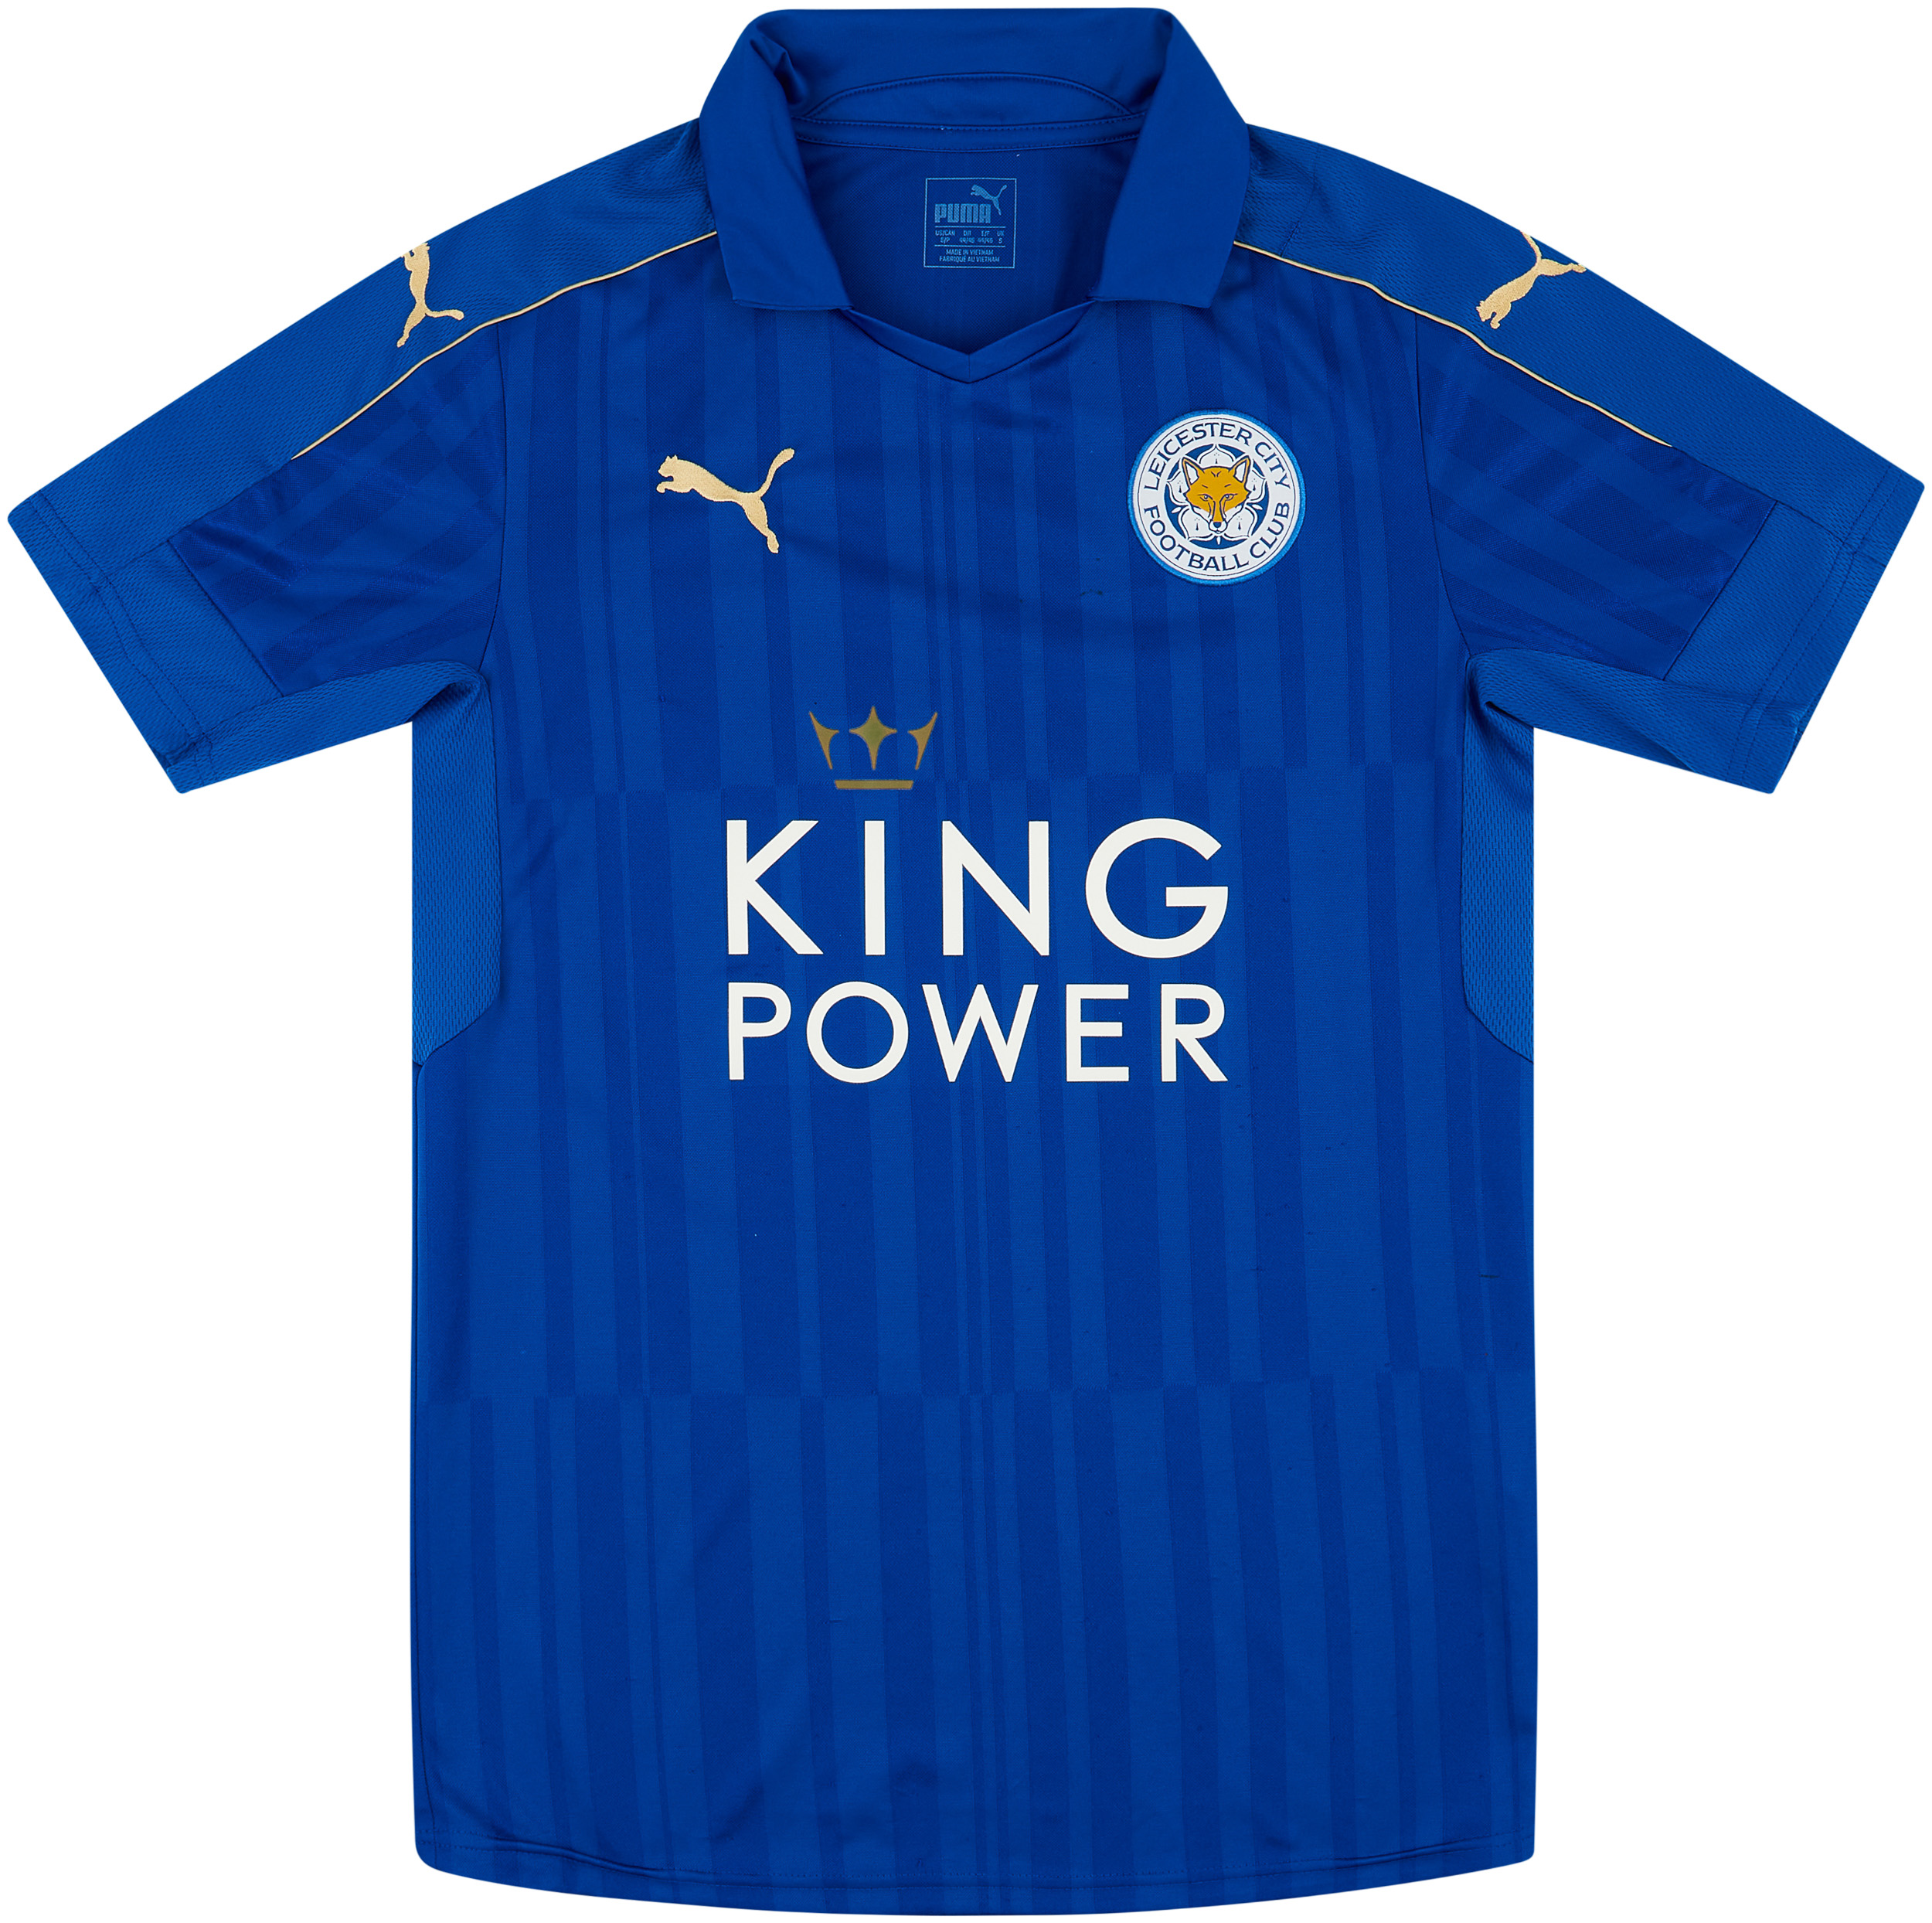 2016-17 Leicester Home Shirt - 8/10 - ()